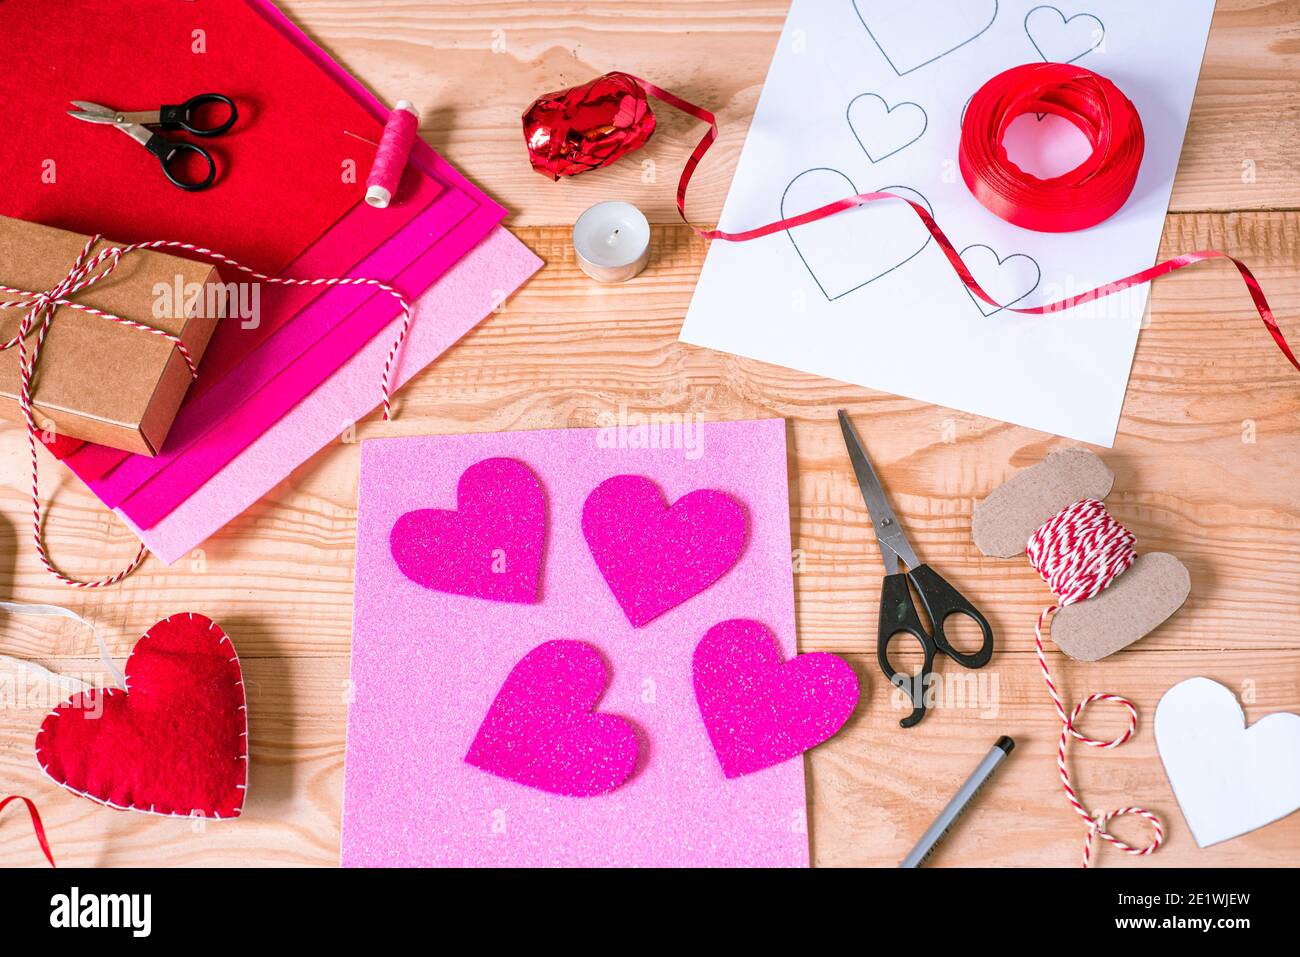 Diy felt and foamiran crafting for Valentine's Day Stock Photo